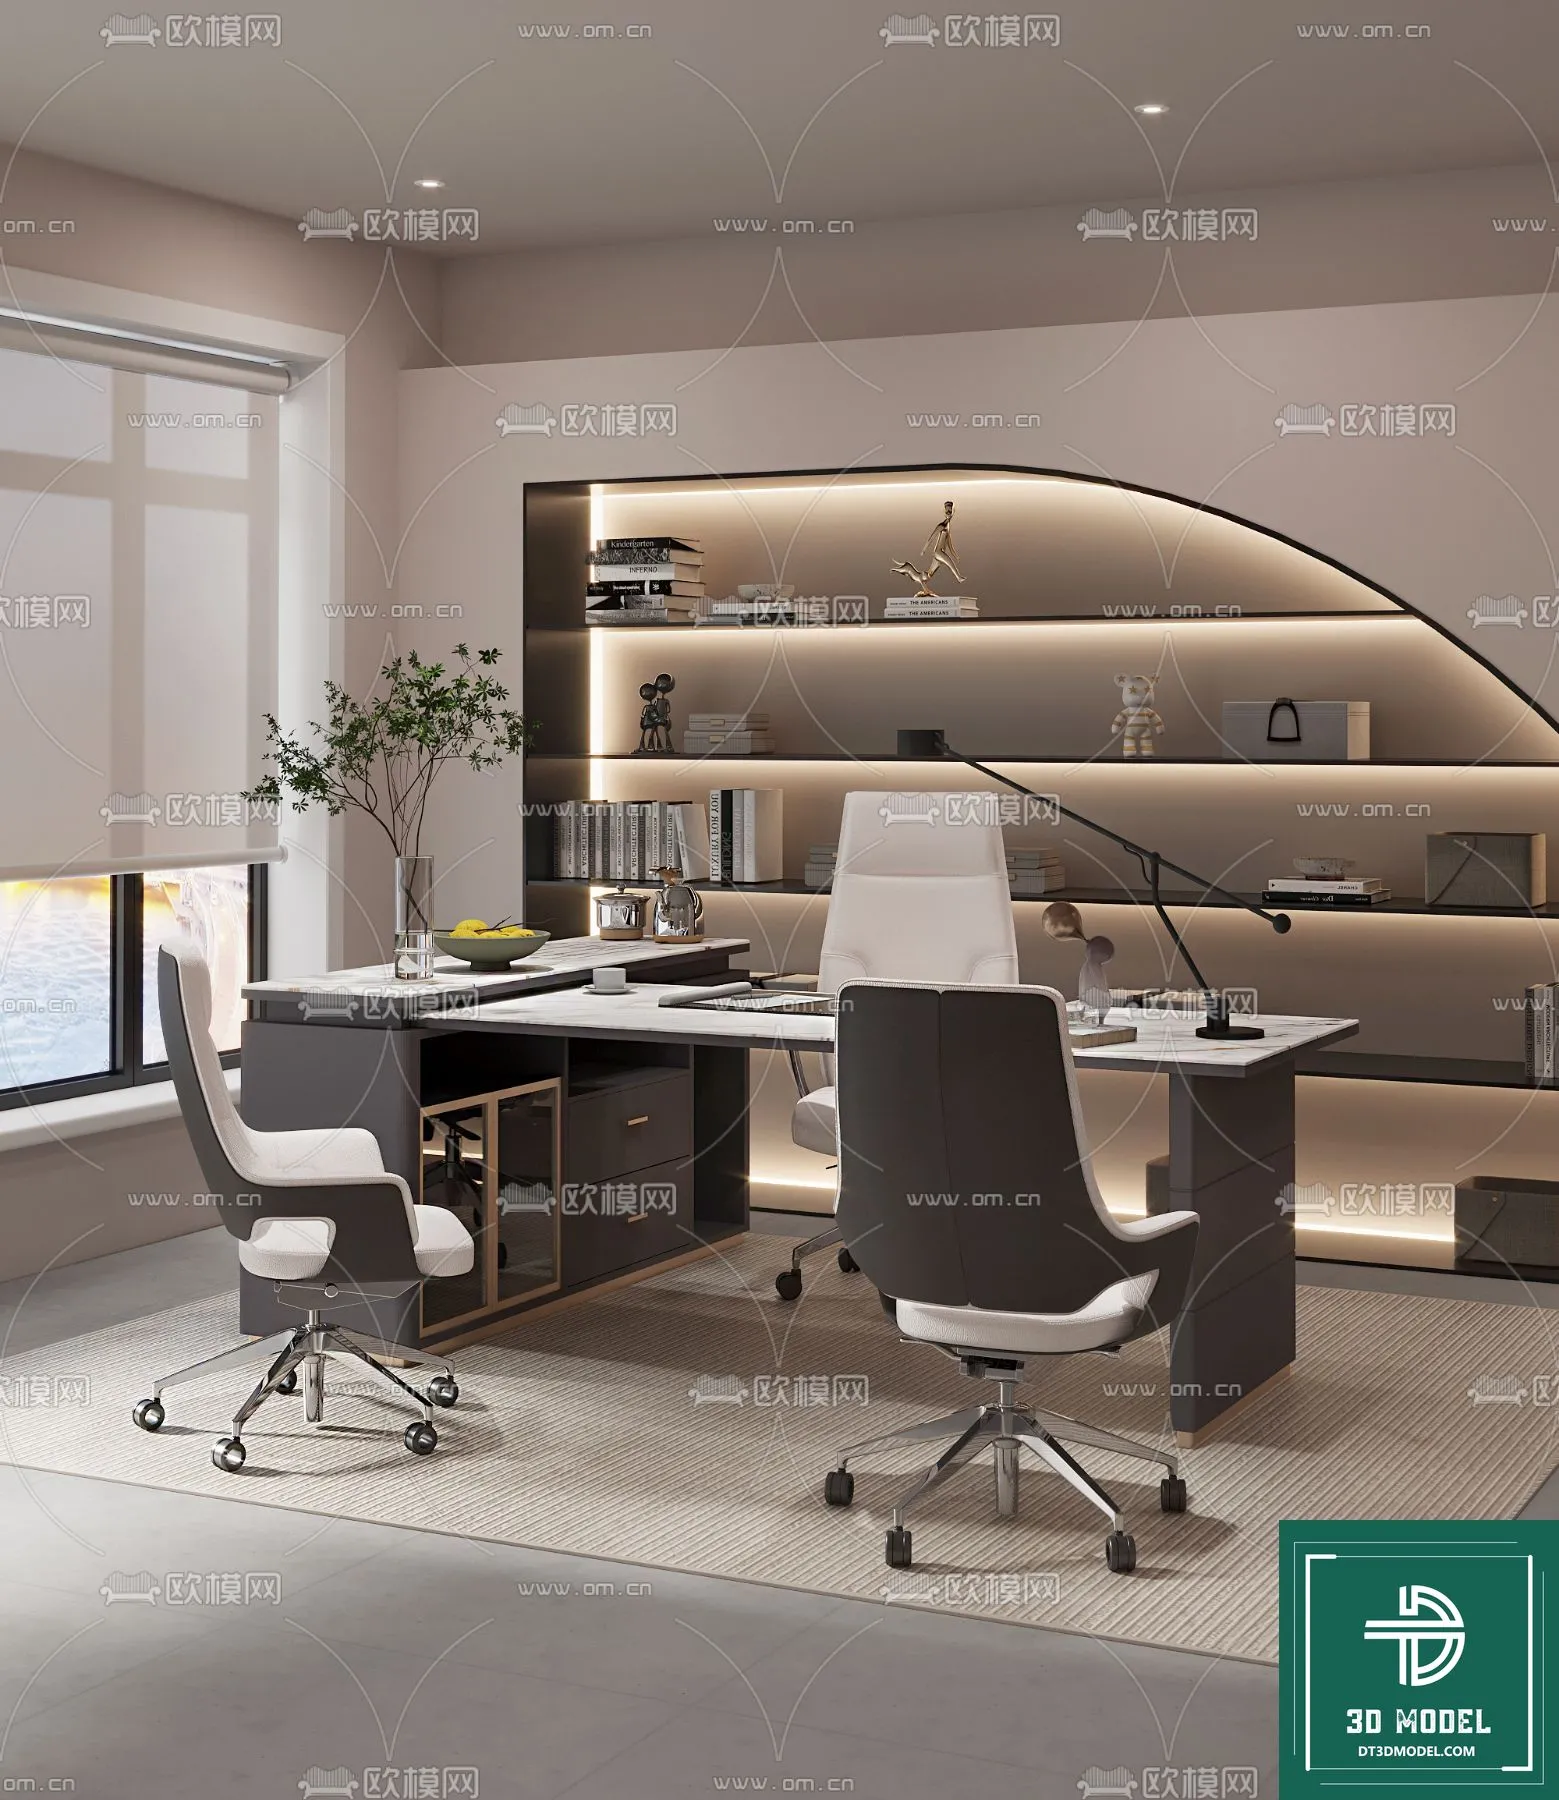 OFFICE ROOM FOR MANAGER – 3DMODEL – 076